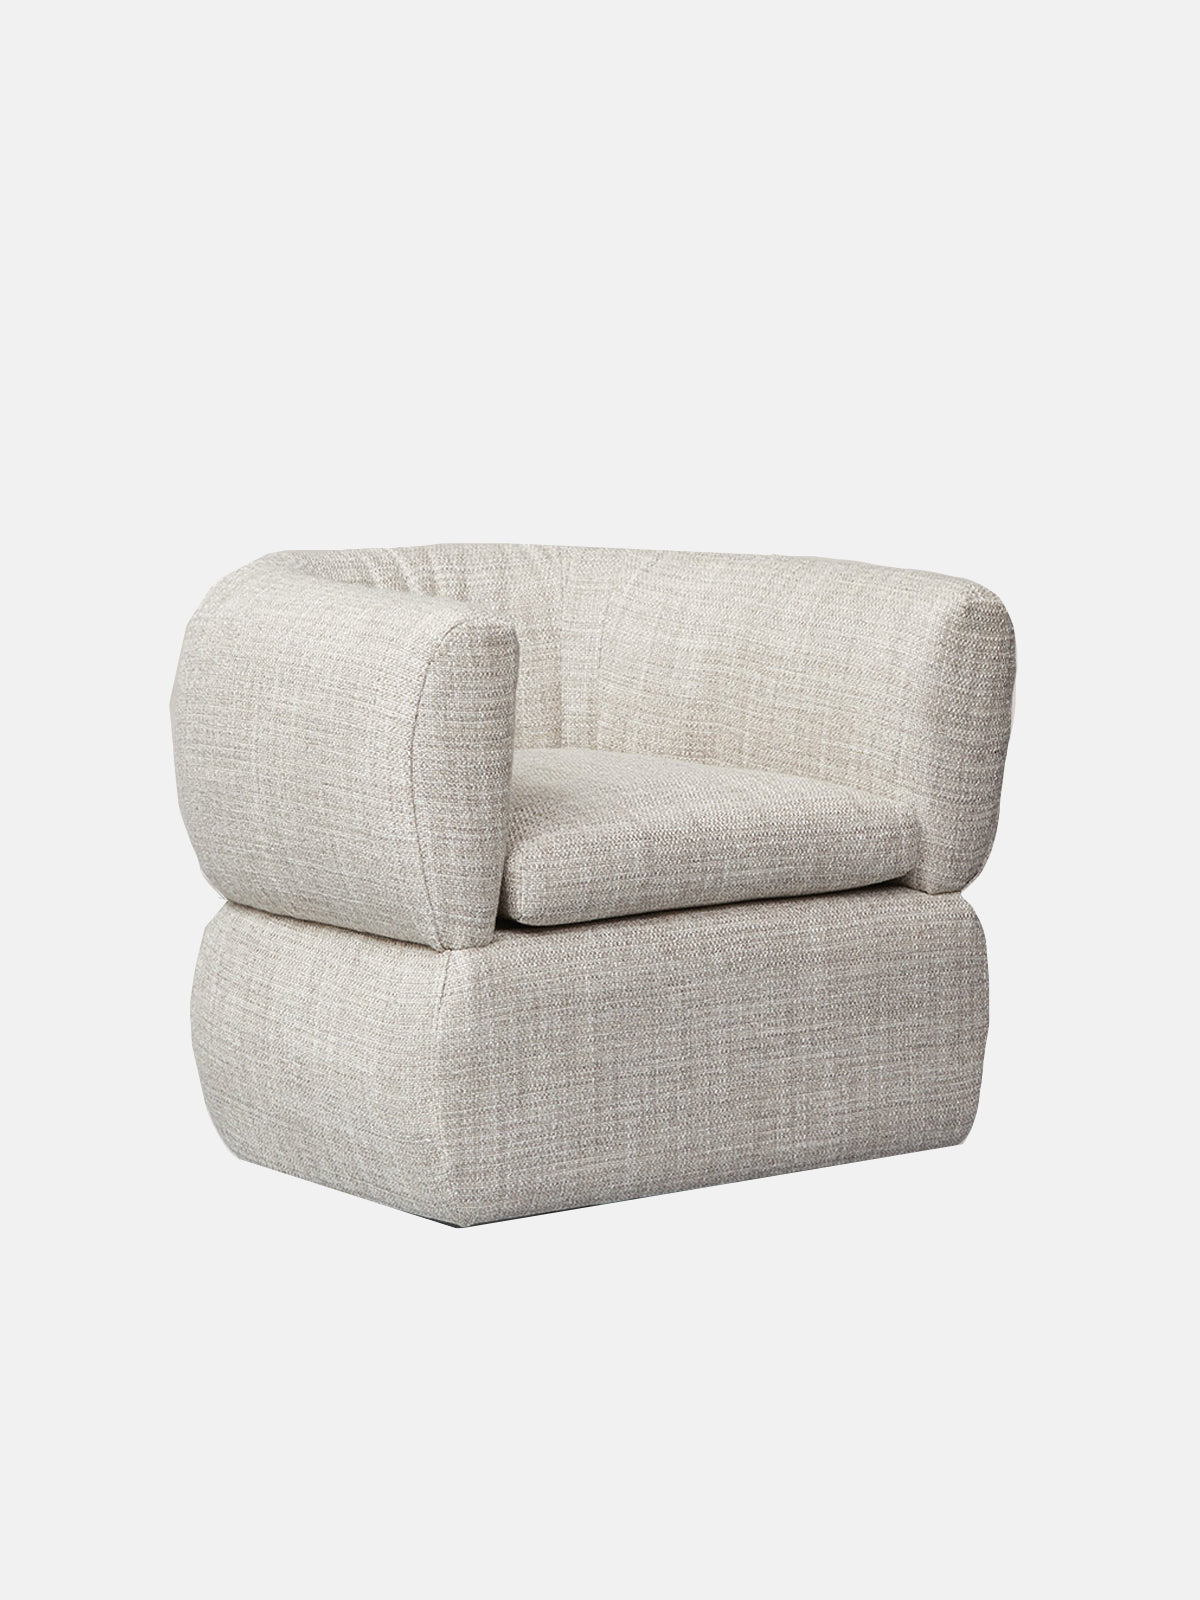 The Bouty Swivel Chair